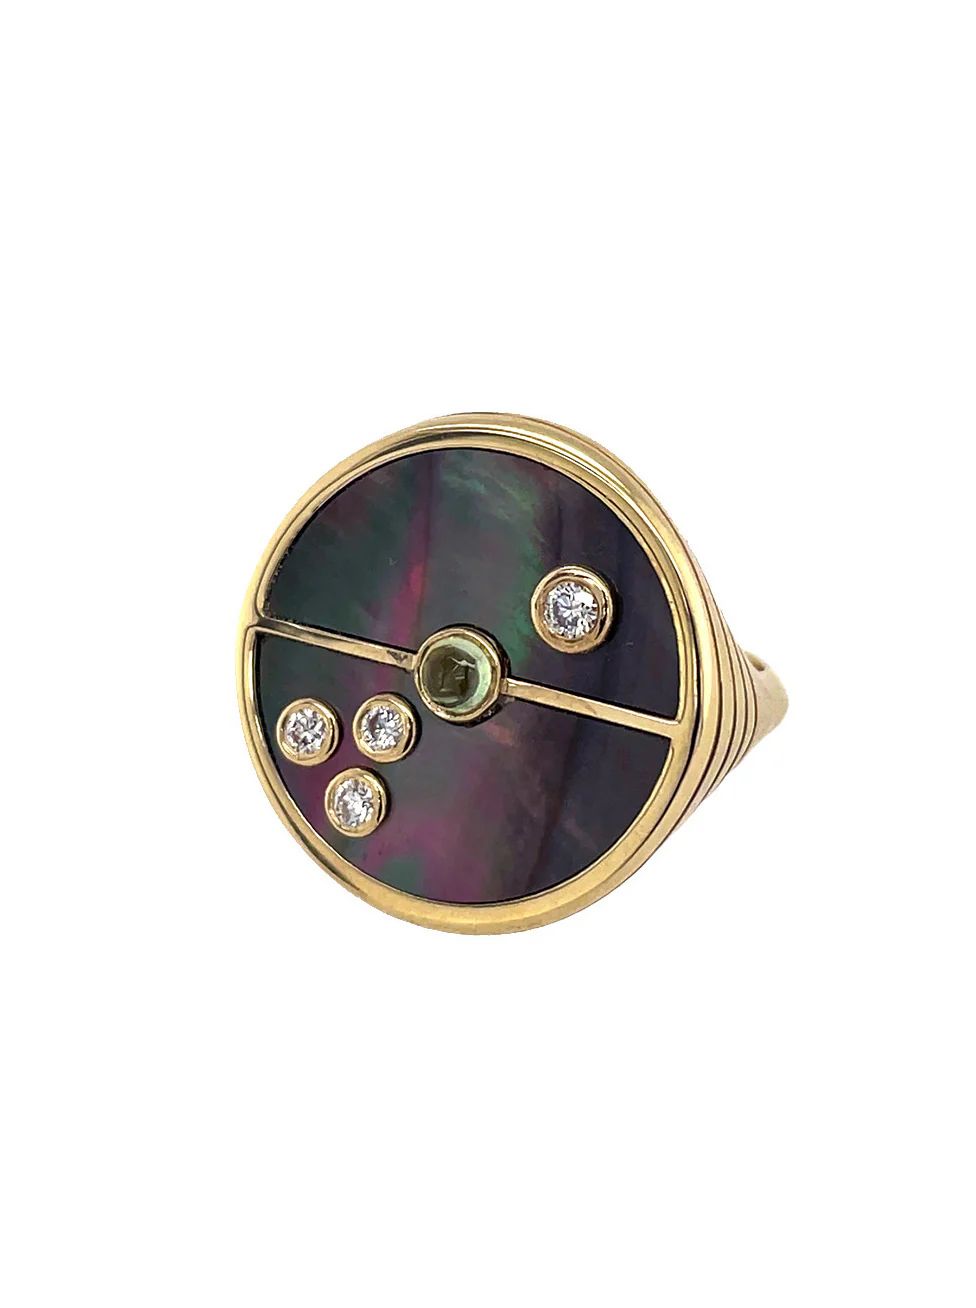 Dark Mother of Pearl and Mint Garnet Compass Yellow Gold Ring | YLANG 23